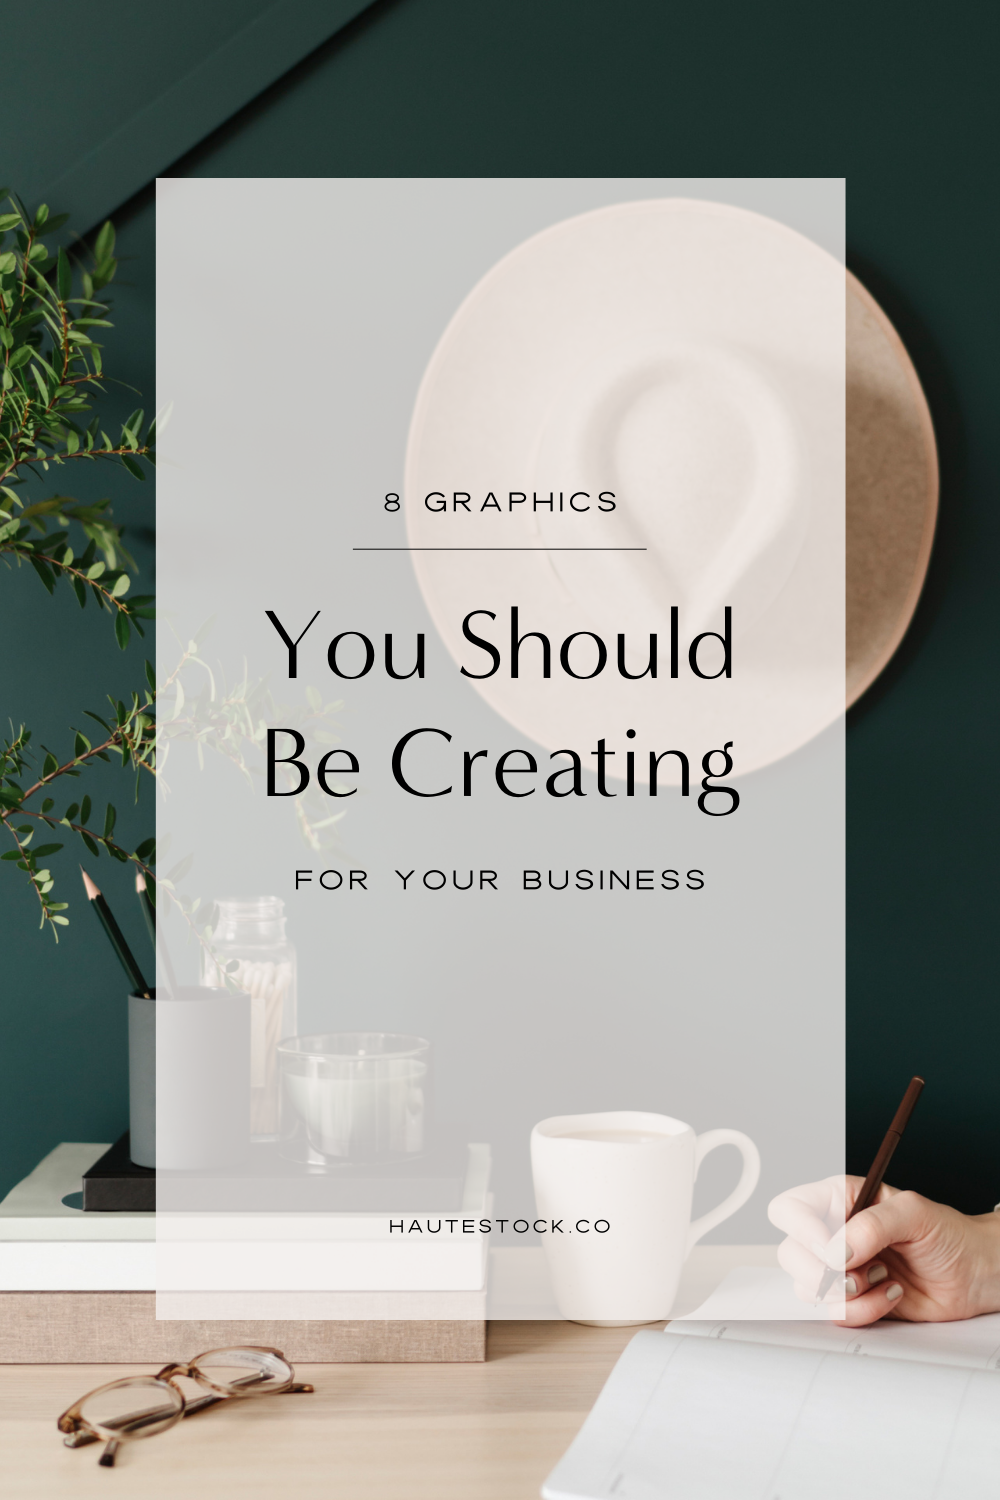 Learn which graphics you should be making for your brand for cohesiveness and a professional looking brand.